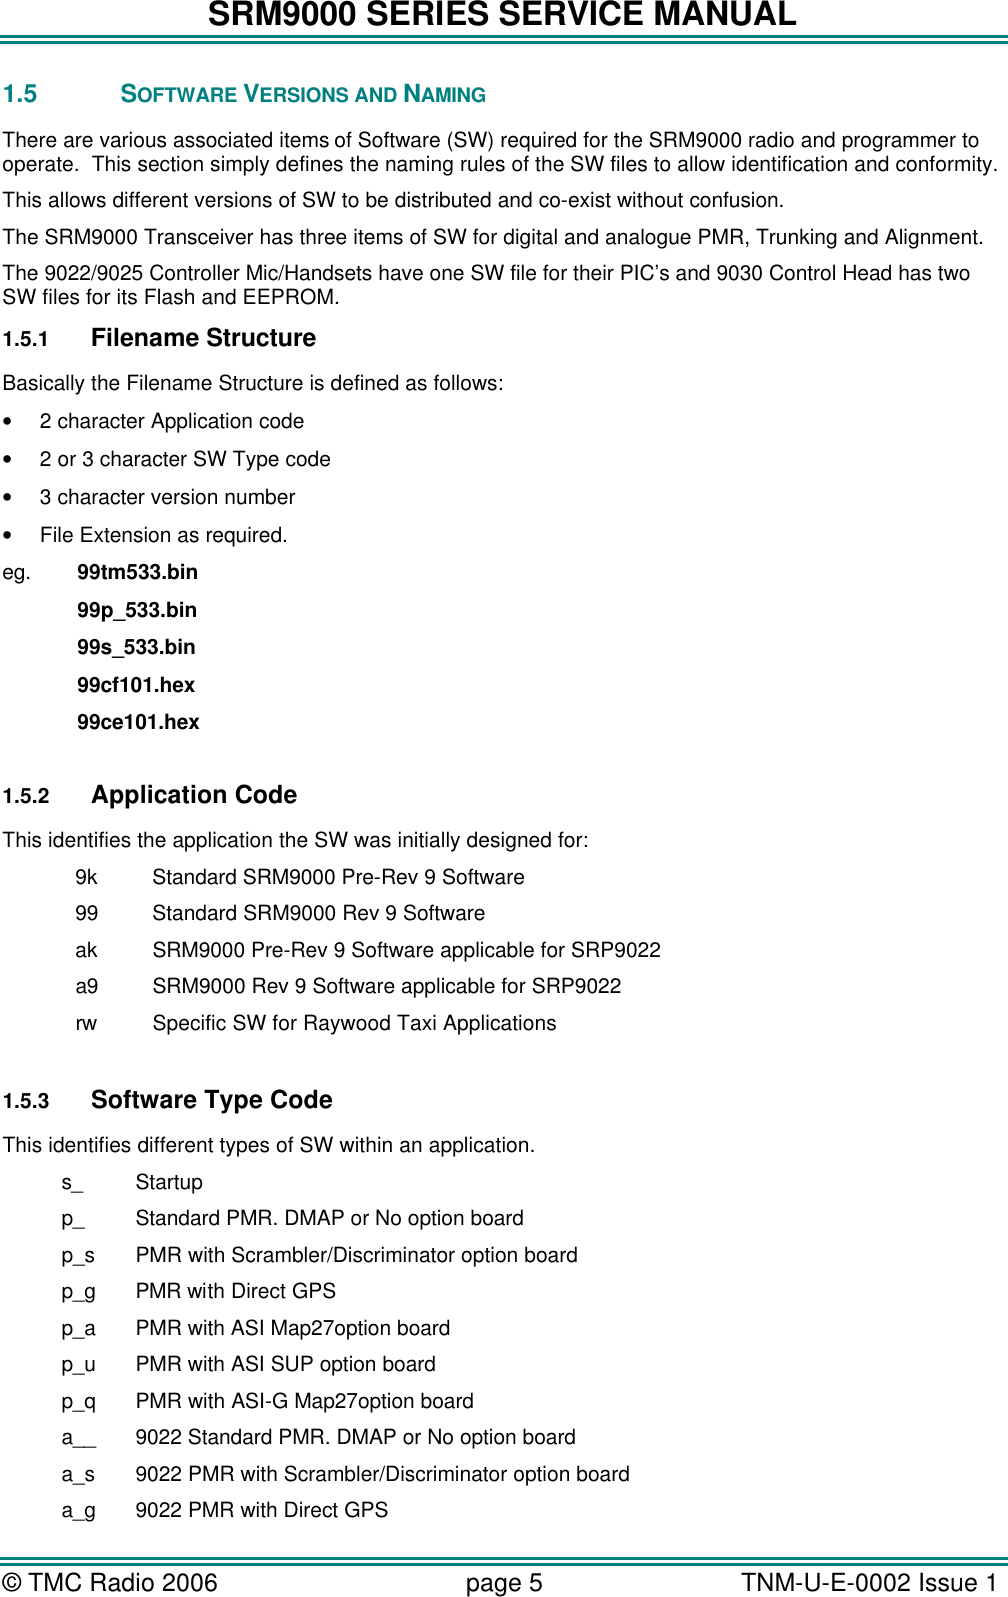 SRM9000 SERIES SERVICE MANUAL © TMC Radio 2006 page 5   TNM-U-E-0002 Issue 1  1.5 SOFTWARE VERSIONS AND NAMING There are various associated items of Software (SW) required for the SRM9000 radio and programmer to operate.  This section simply defines the naming rules of the SW files to allow identification and conformity.   This allows different versions of SW to be distributed and co-exist without confusion. The SRM9000 Transceiver has three items of SW for digital and analogue PMR, Trunking and Alignment.    The 9022/9025 Controller Mic/Handsets have one SW file for their PIC’s and 9030 Control Head has two SW files for its Flash and EEPROM. 1.5.1 Filename Structure Basically the Filename Structure is defined as follows: • 2 character Application code • 2 or 3 character SW Type code • 3 character version number • File Extension as required. eg.   99tm533.bin    99p_533.bin    99s_533.bin    99cf101.hex    99ce101.hex    1.5.2 Application Code This identifies the application the SW was initially designed for:  9k    Standard SRM9000 Pre-Rev 9 Software  99    Standard SRM9000 Rev 9 Software  ak SRM9000 Pre-Rev 9 Software applicable for SRP9022  a9 SRM9000 Rev 9 Software applicable for SRP9022  rw  Specific SW for Raywood Taxi Applications  1.5.3 Software Type Code This identifies different types of SW within an application. s_ Startup p_ Standard PMR. DMAP or No option board p_s PMR with Scrambler/Discriminator option board p_g PMR with Direct GPS p_a PMR with ASI Map27option board p_u PMR with ASI SUP option board p_q PMR with ASI-G Map27option board a__ 9022 Standard PMR. DMAP or No option board a_s 9022 PMR with Scrambler/Discriminator option board a_g 9022 PMR with Direct GPS 